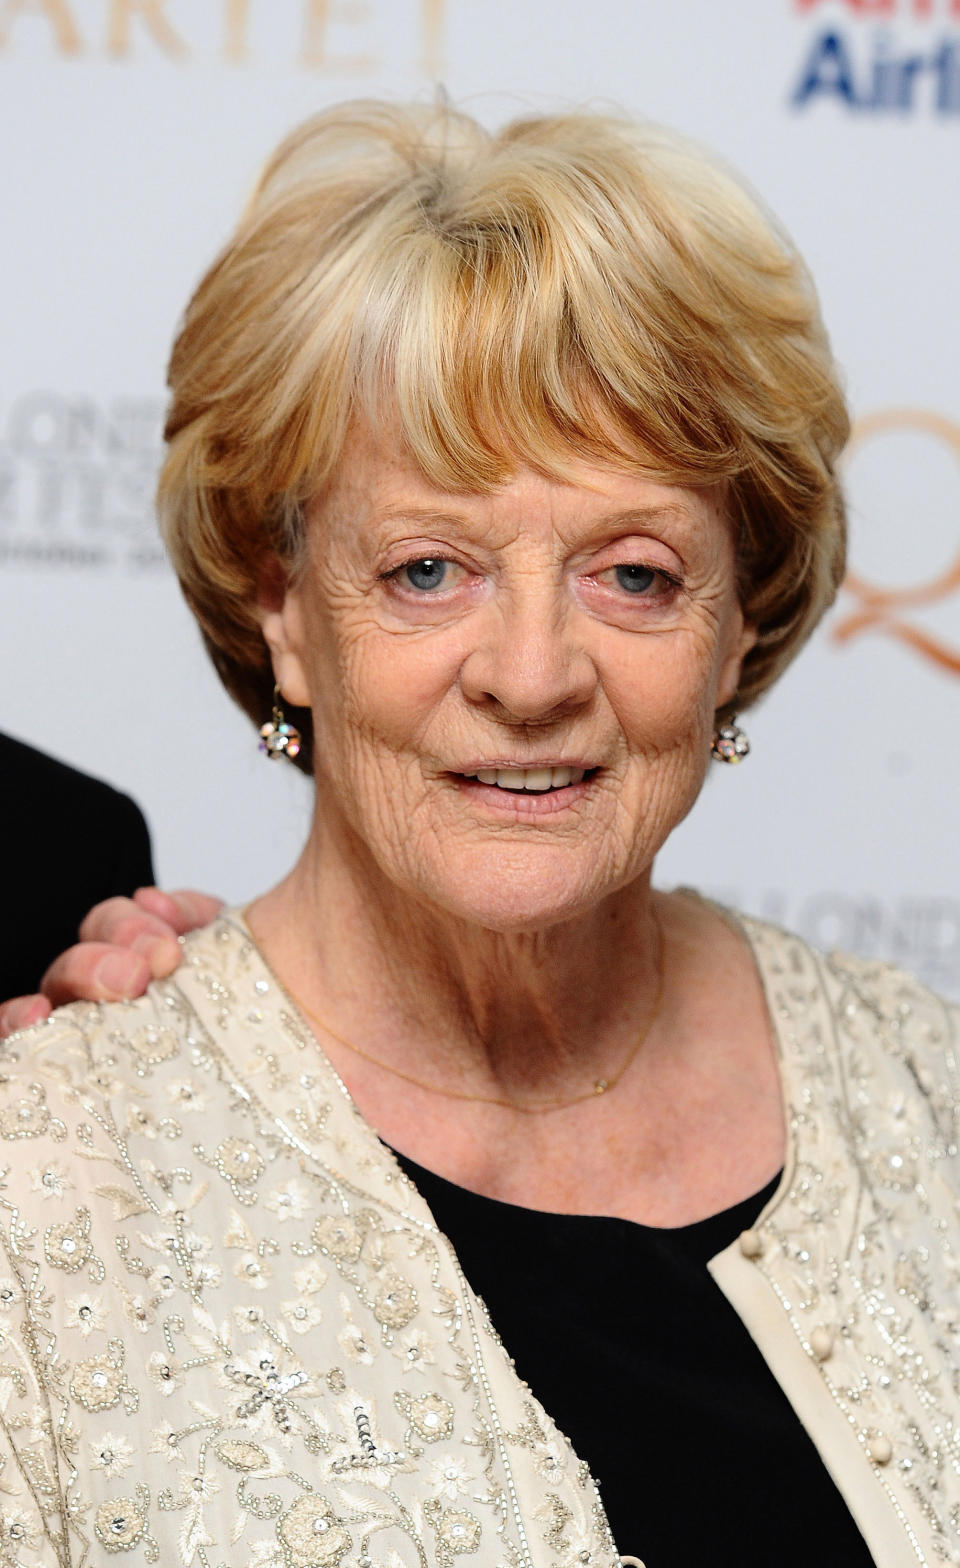 Already a legend, Dame Maggie Smith continues to win fans with her performance as the Dowager Countess in hit TV series 'Downton Abbey'.   She's also no stranger to the big screen, and starred in 'The Best Exotic Marigold Hotel' and is set to feature in the upcoming sequel.